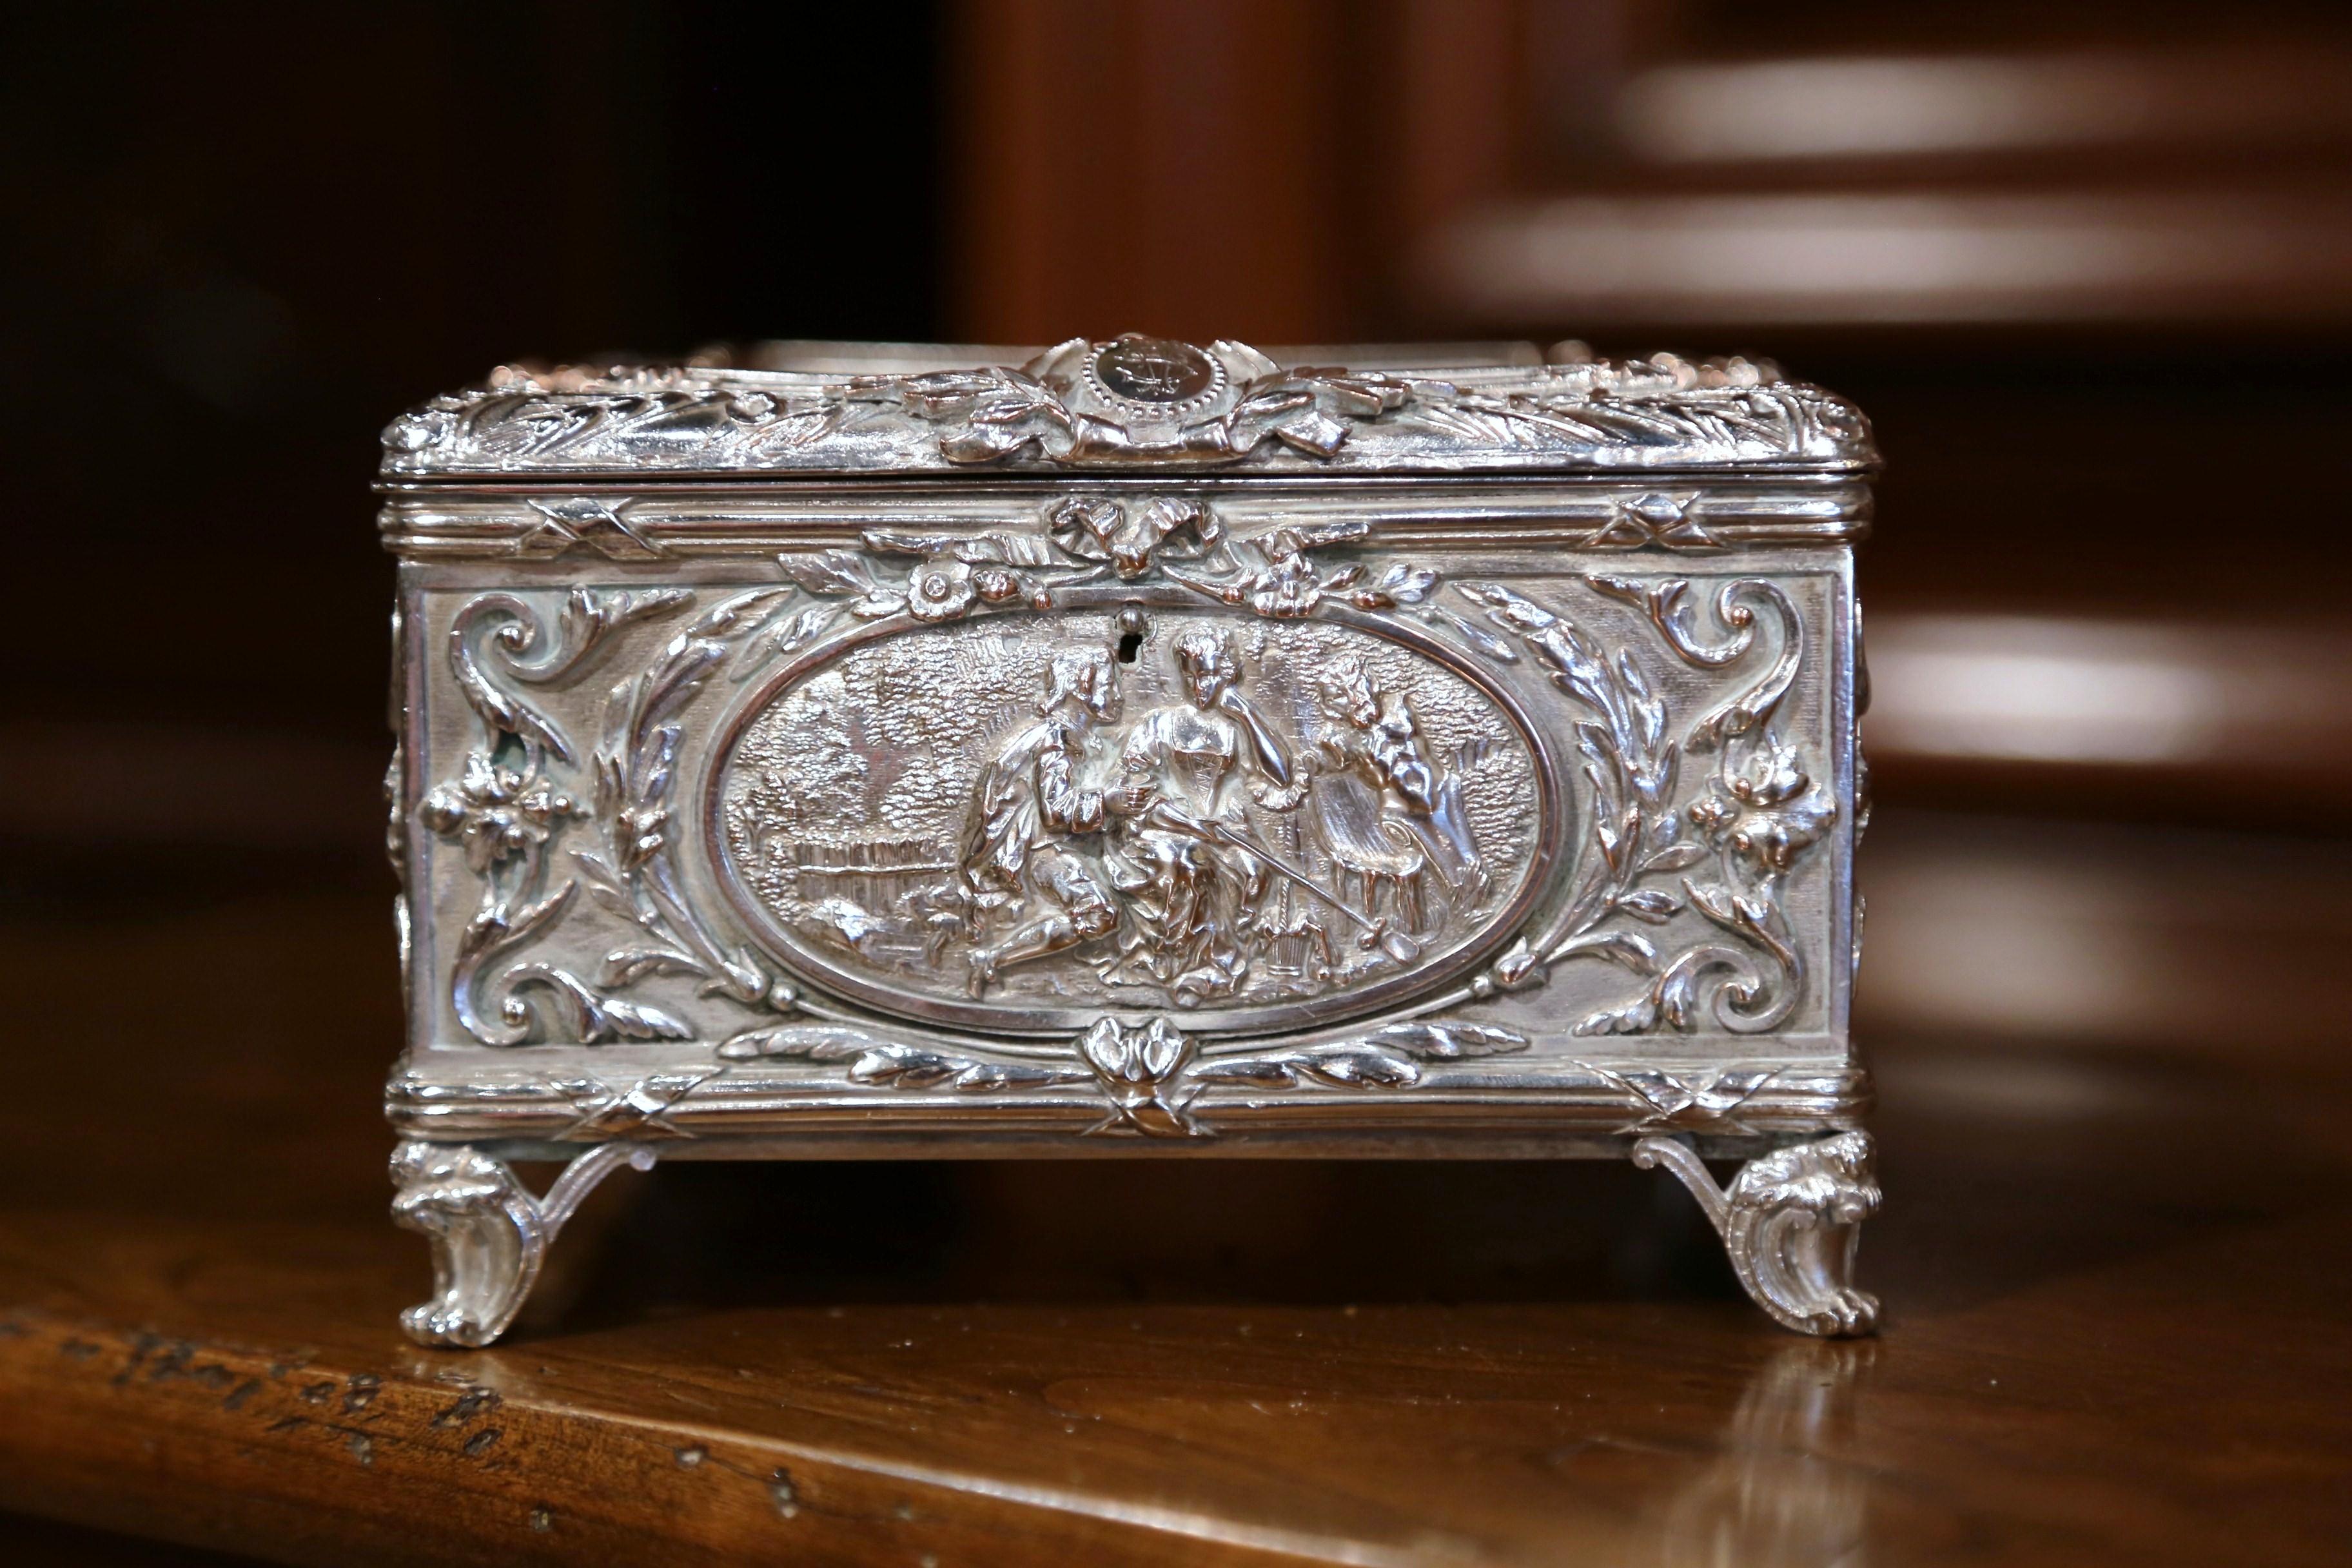 Place this elegant, antique silver coated copper box in your master bath to keep your jewelry safe and organized. Crafted in France, circa 1880, the ornate square casket sits on scroll feet, embellished with four embossed courting scenes on all four